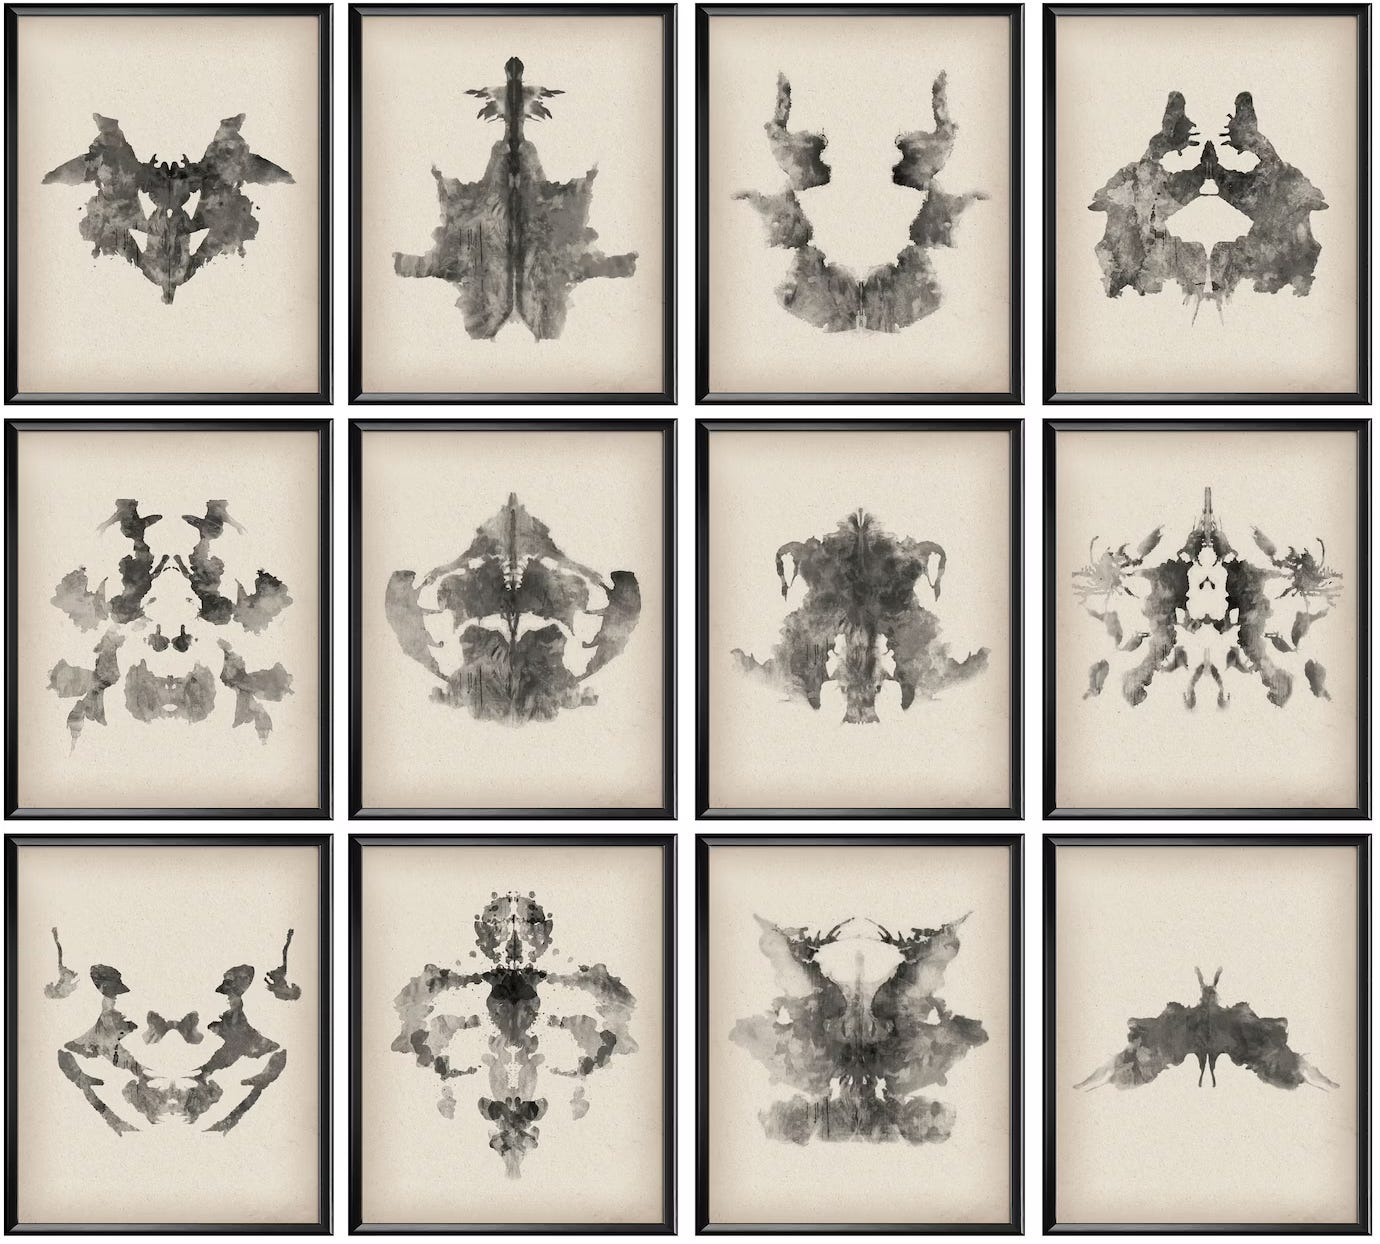 The Rorschach Test Is More Accurate Than You Think